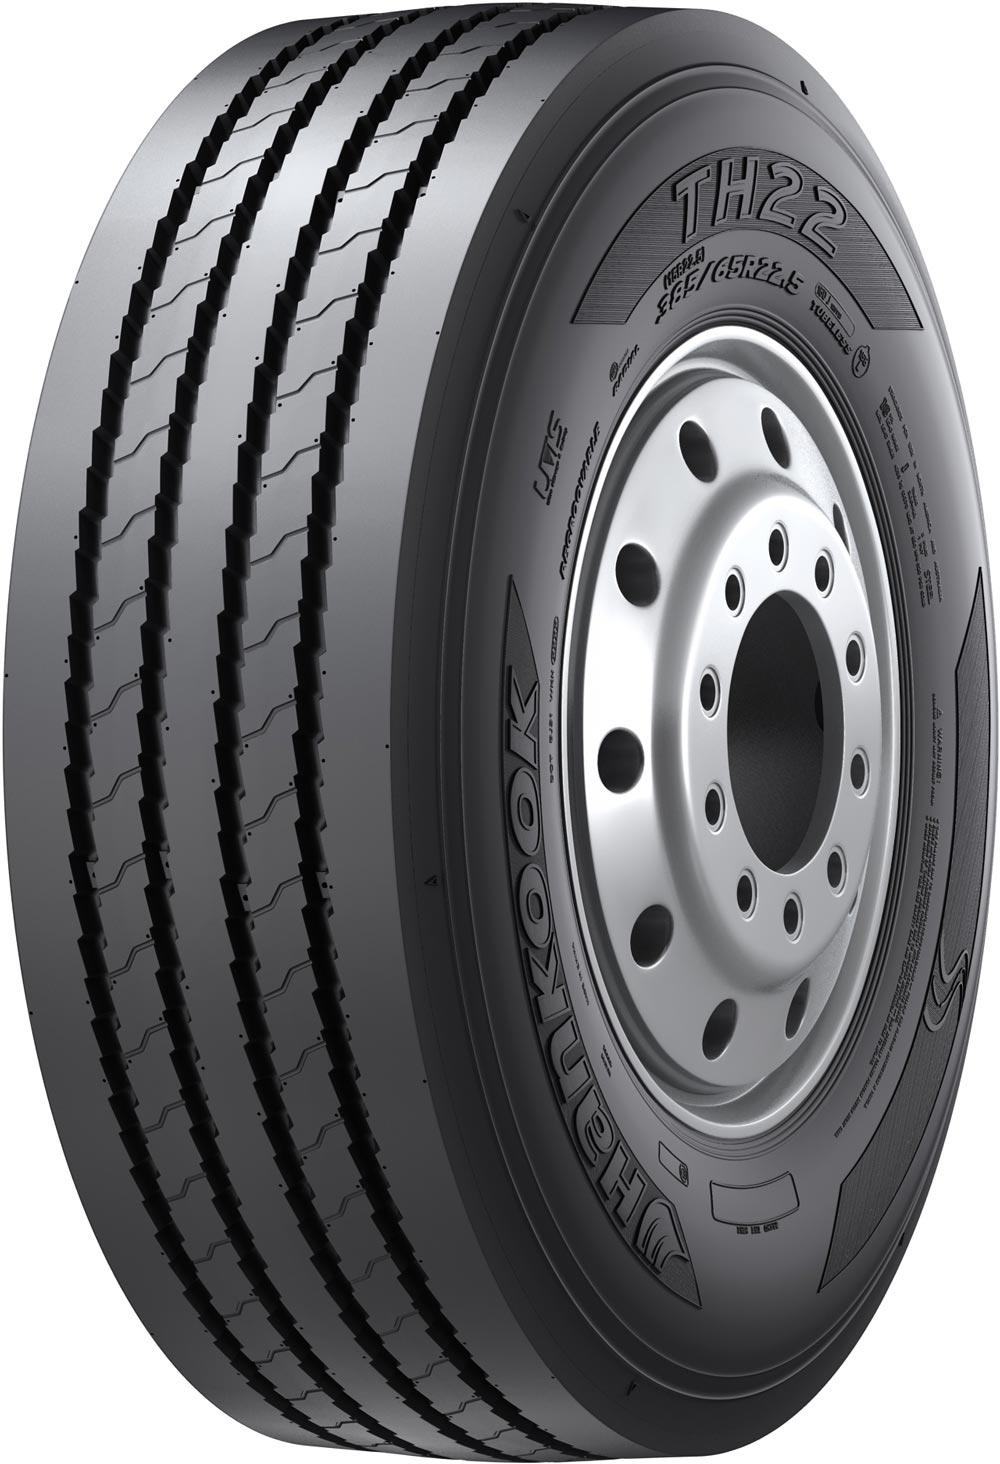 product_type-heavy_tires HANKOOK TH22 16 TL 215/75 R17.5 135J